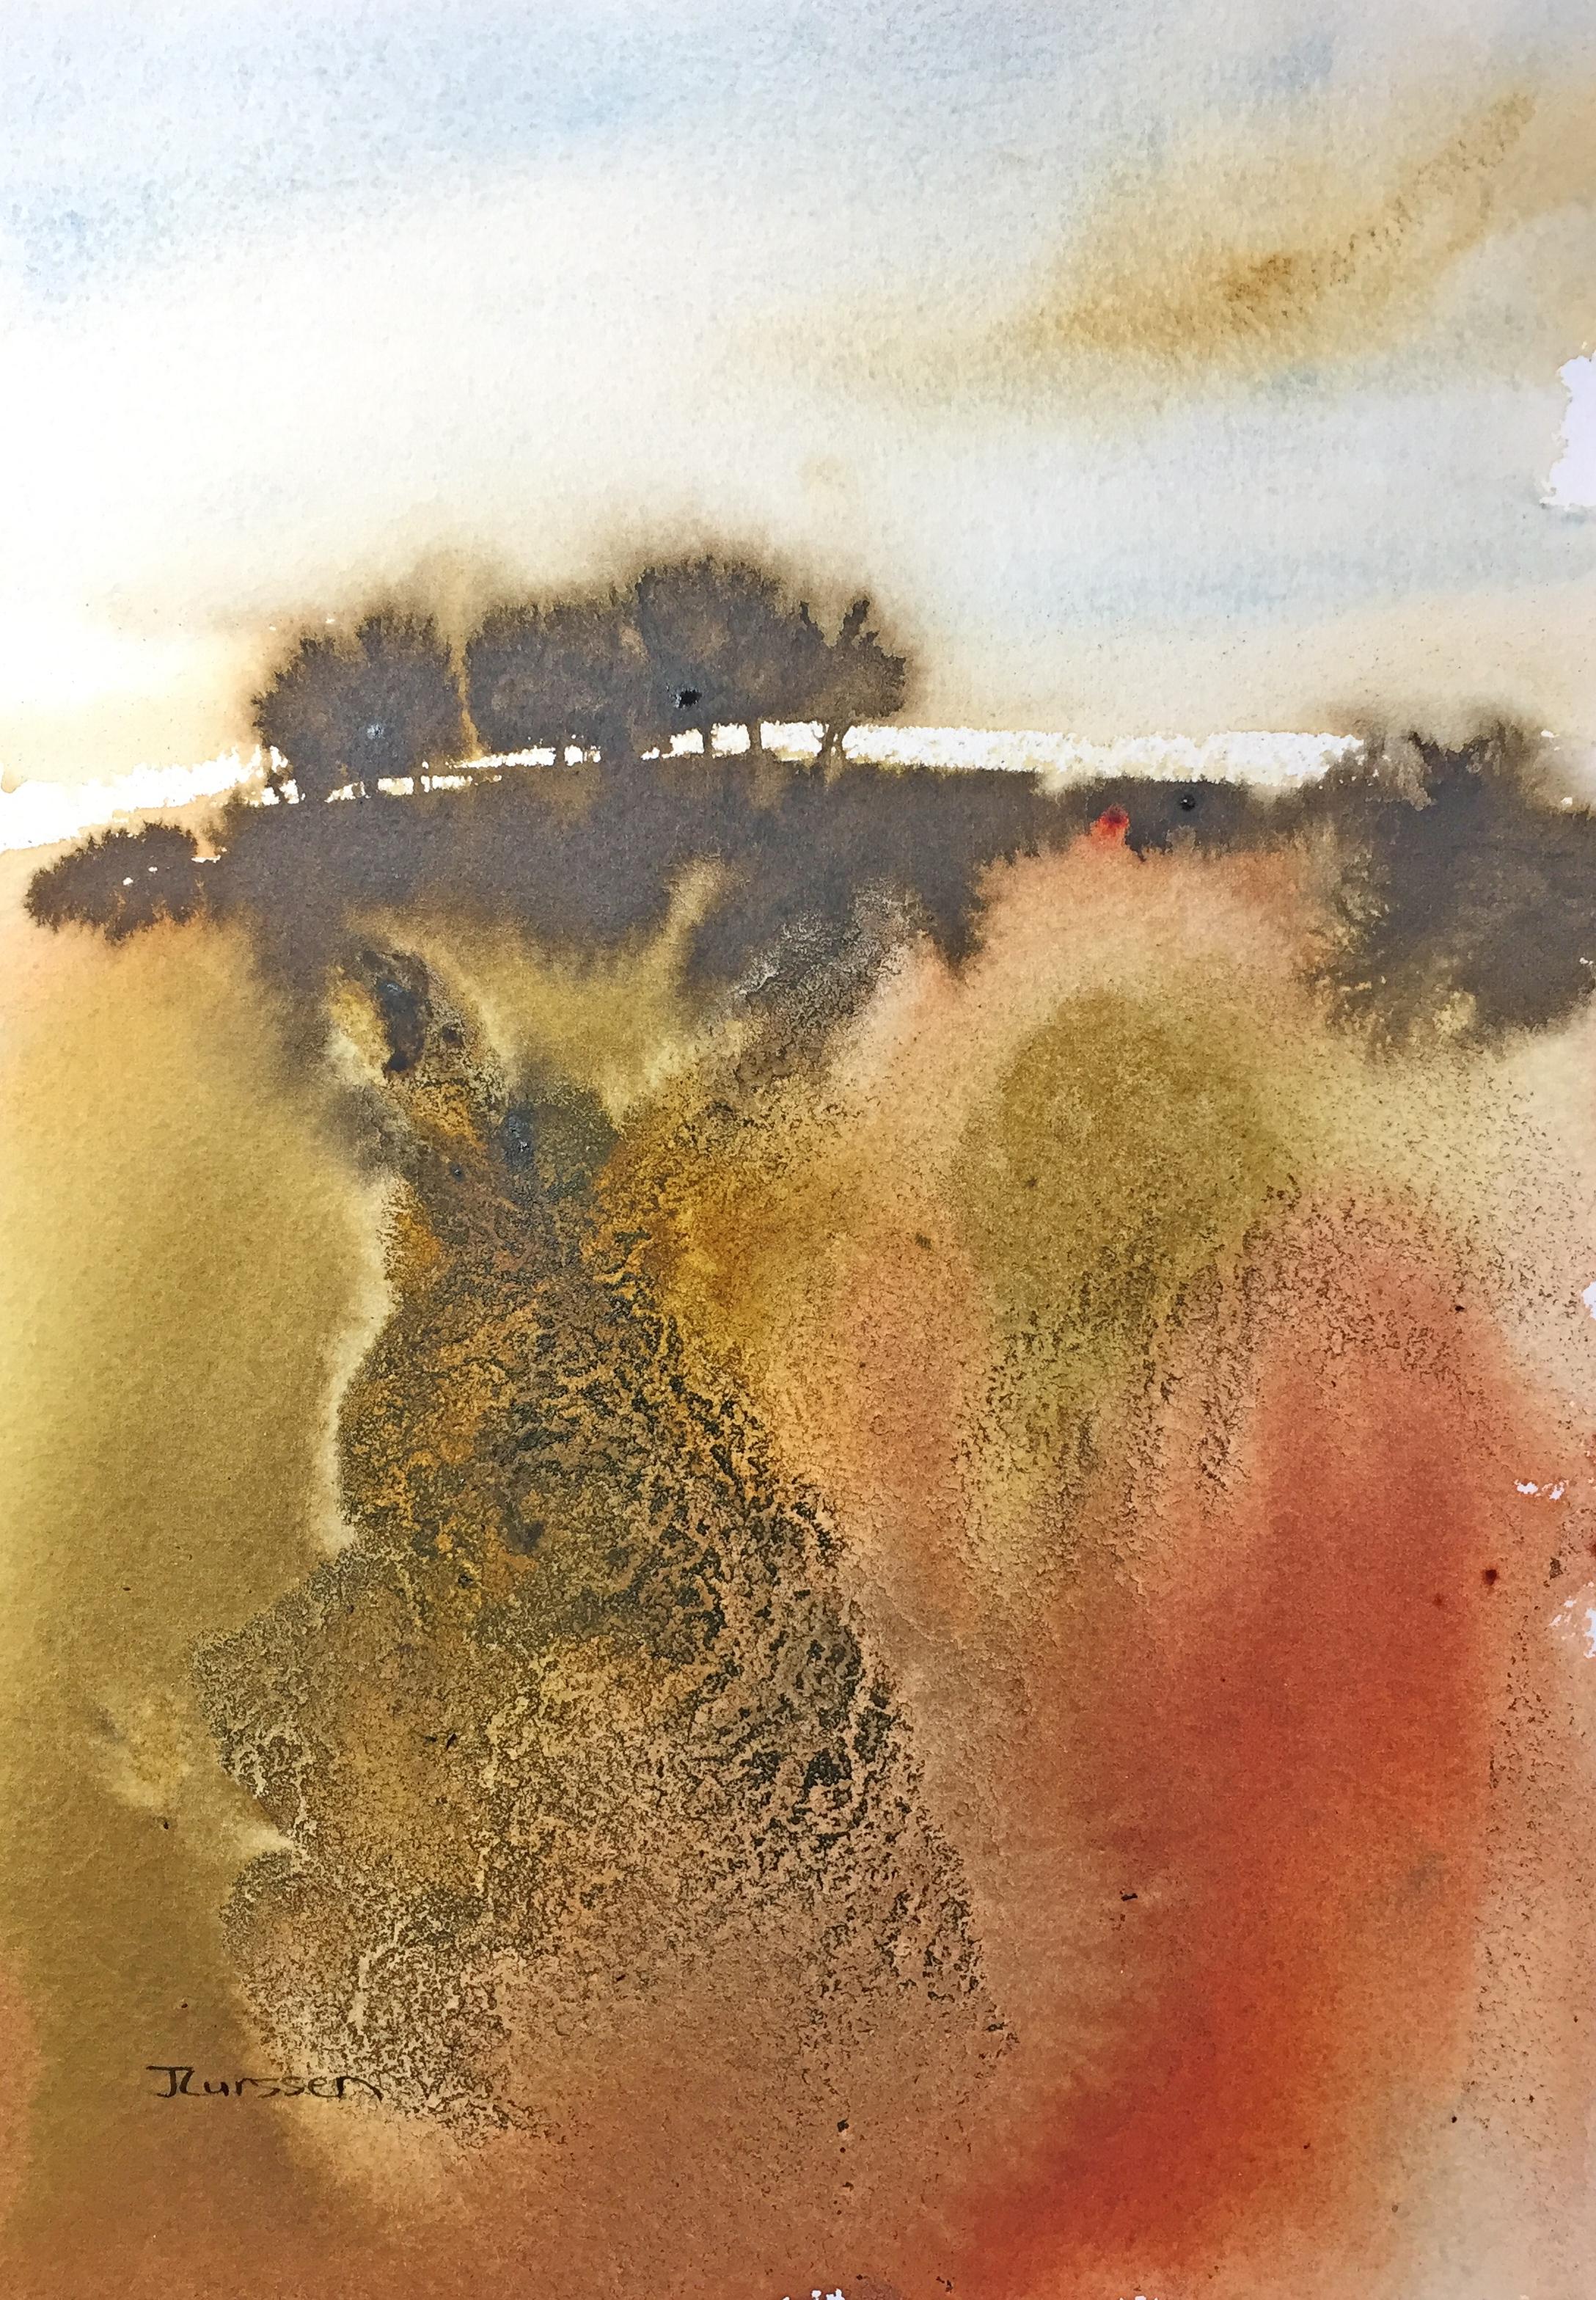 Abstract Landscape #6, Mixed Media on Watercolor Paper - Mixed Media Art by Jean Lurssen